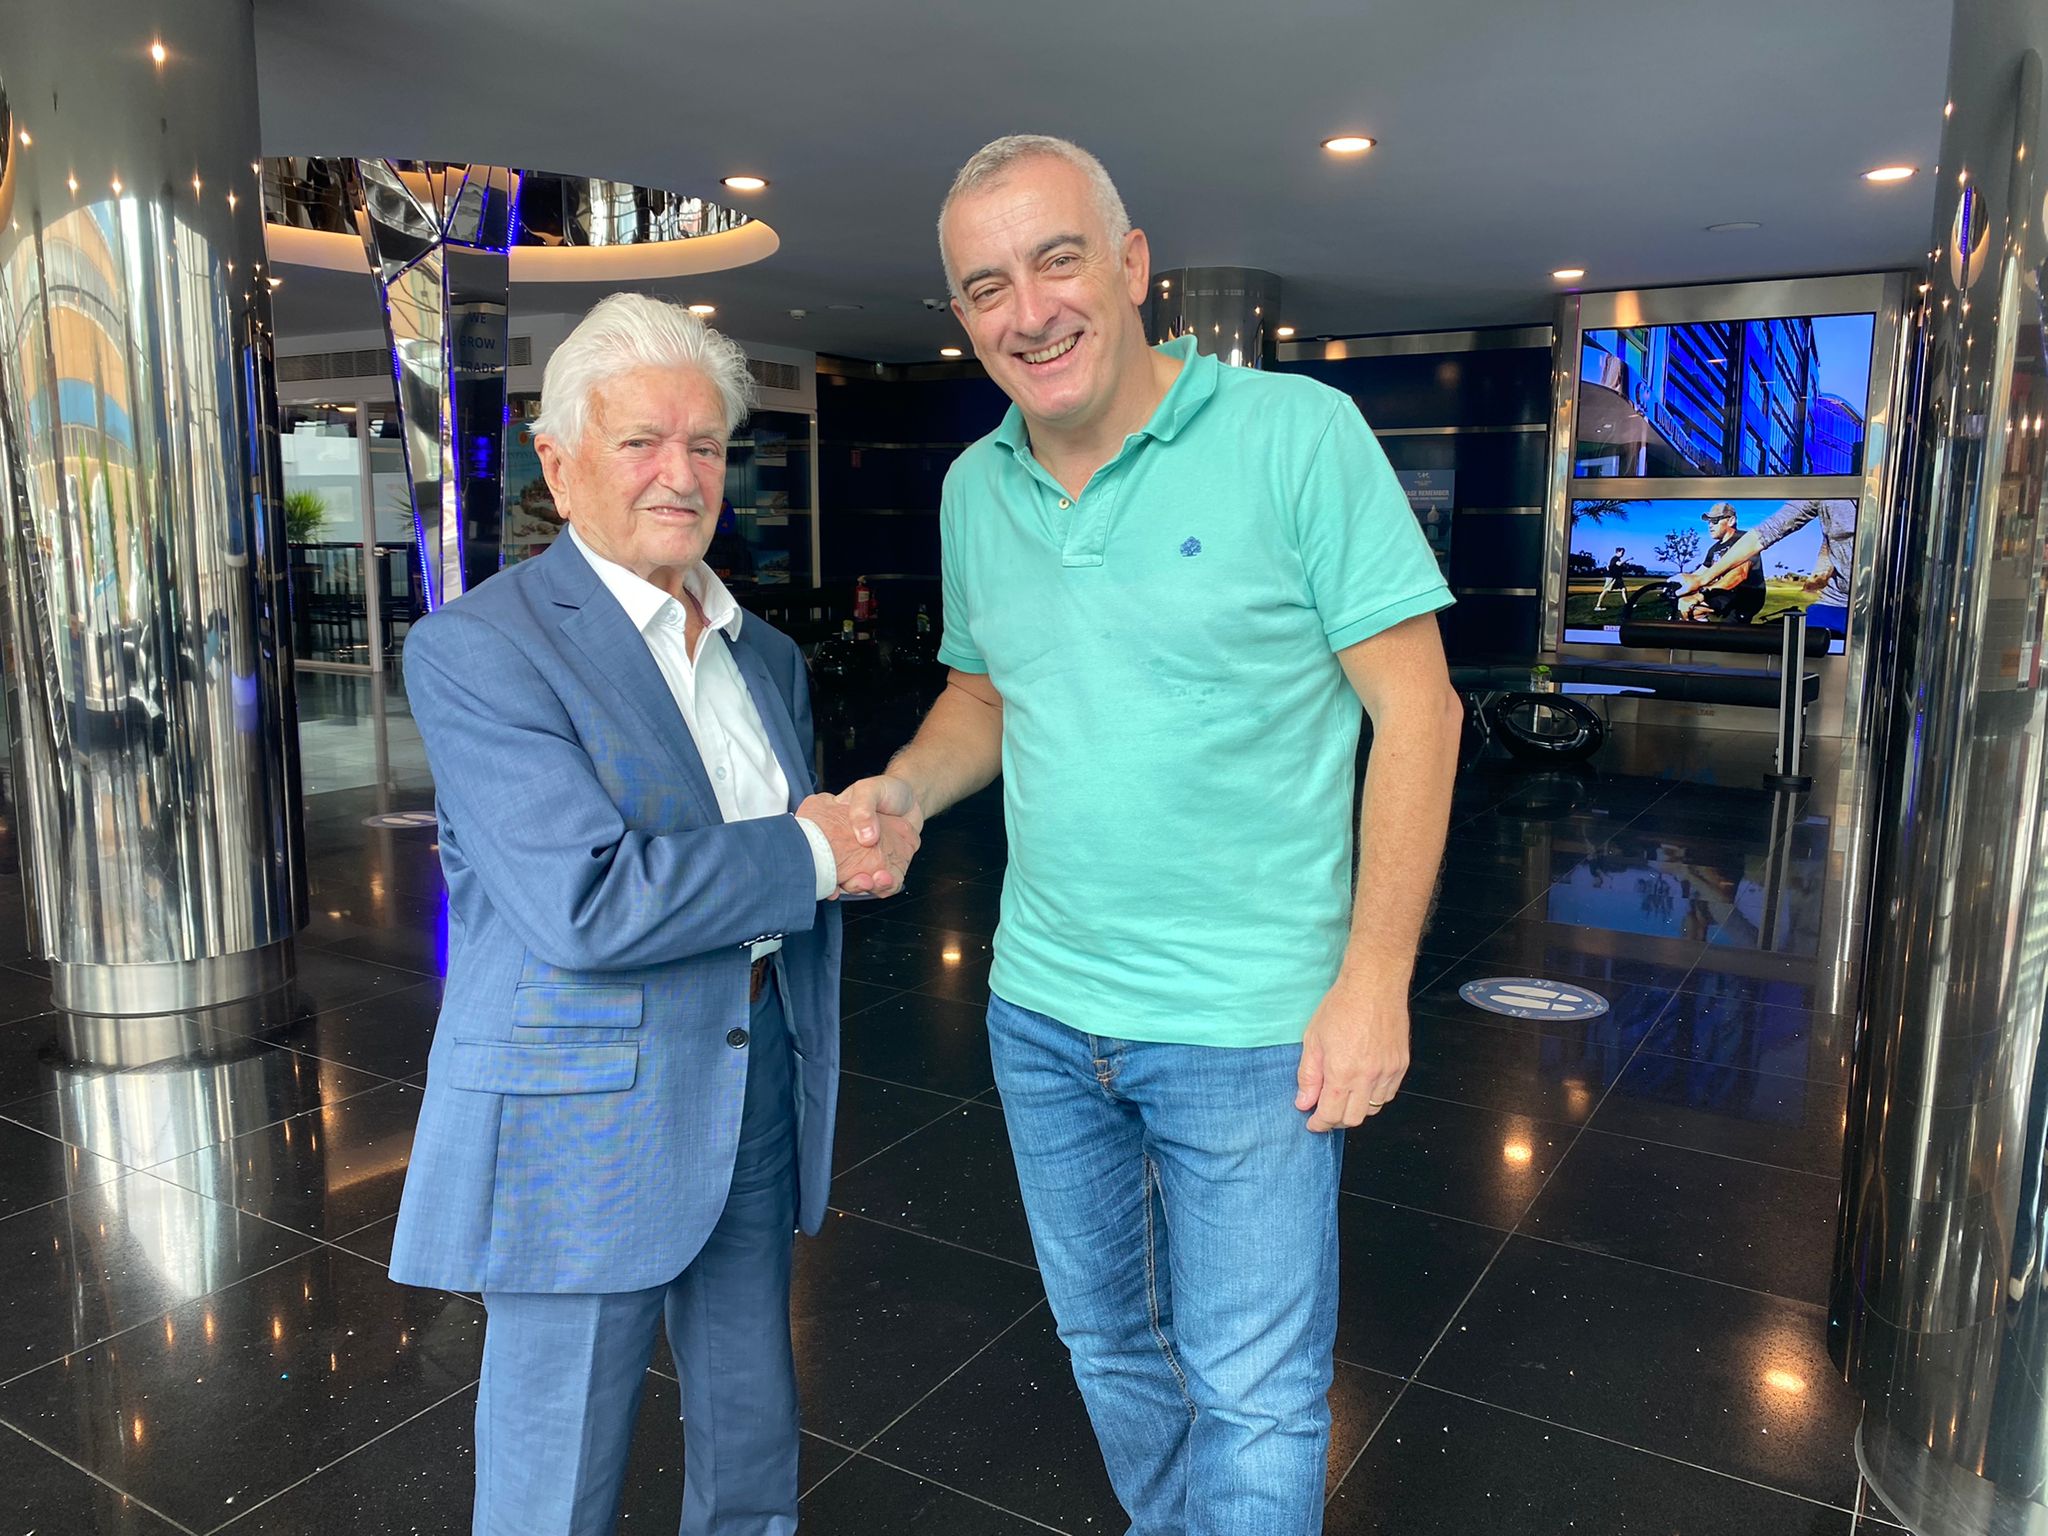 October 2021 (Founder of Action4schools-Sierra Leone) and Howard Measham (Founder of Wellfound UK) met in Gibraltar and Action4schools pledged to fund 10 new water wells at Wellound sites  at a cost of £25,000